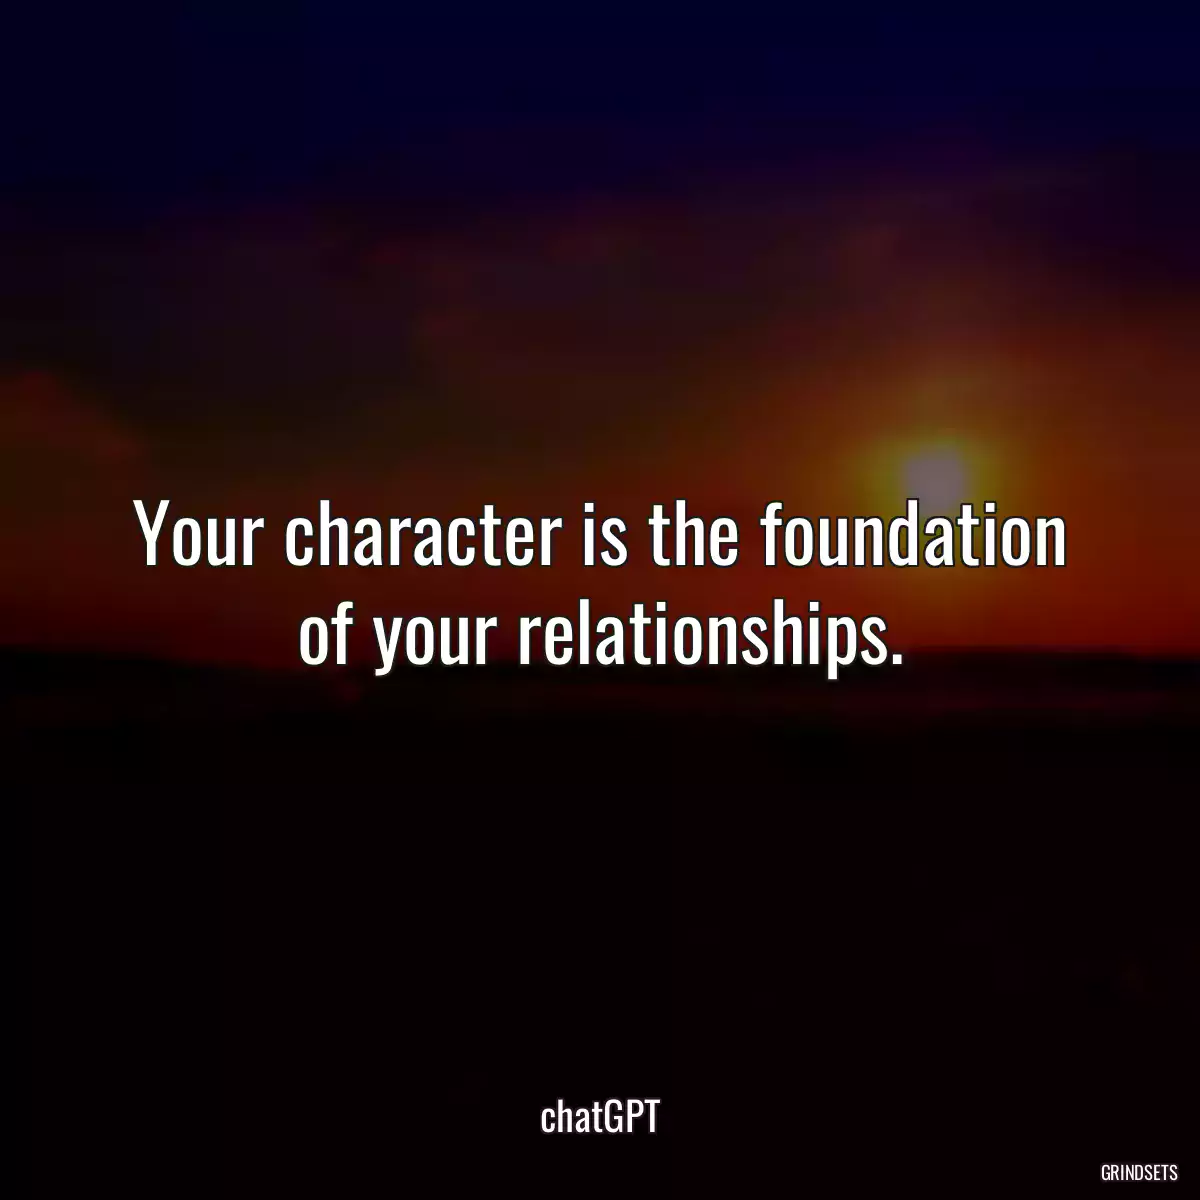 Your character is the foundation of your relationships.